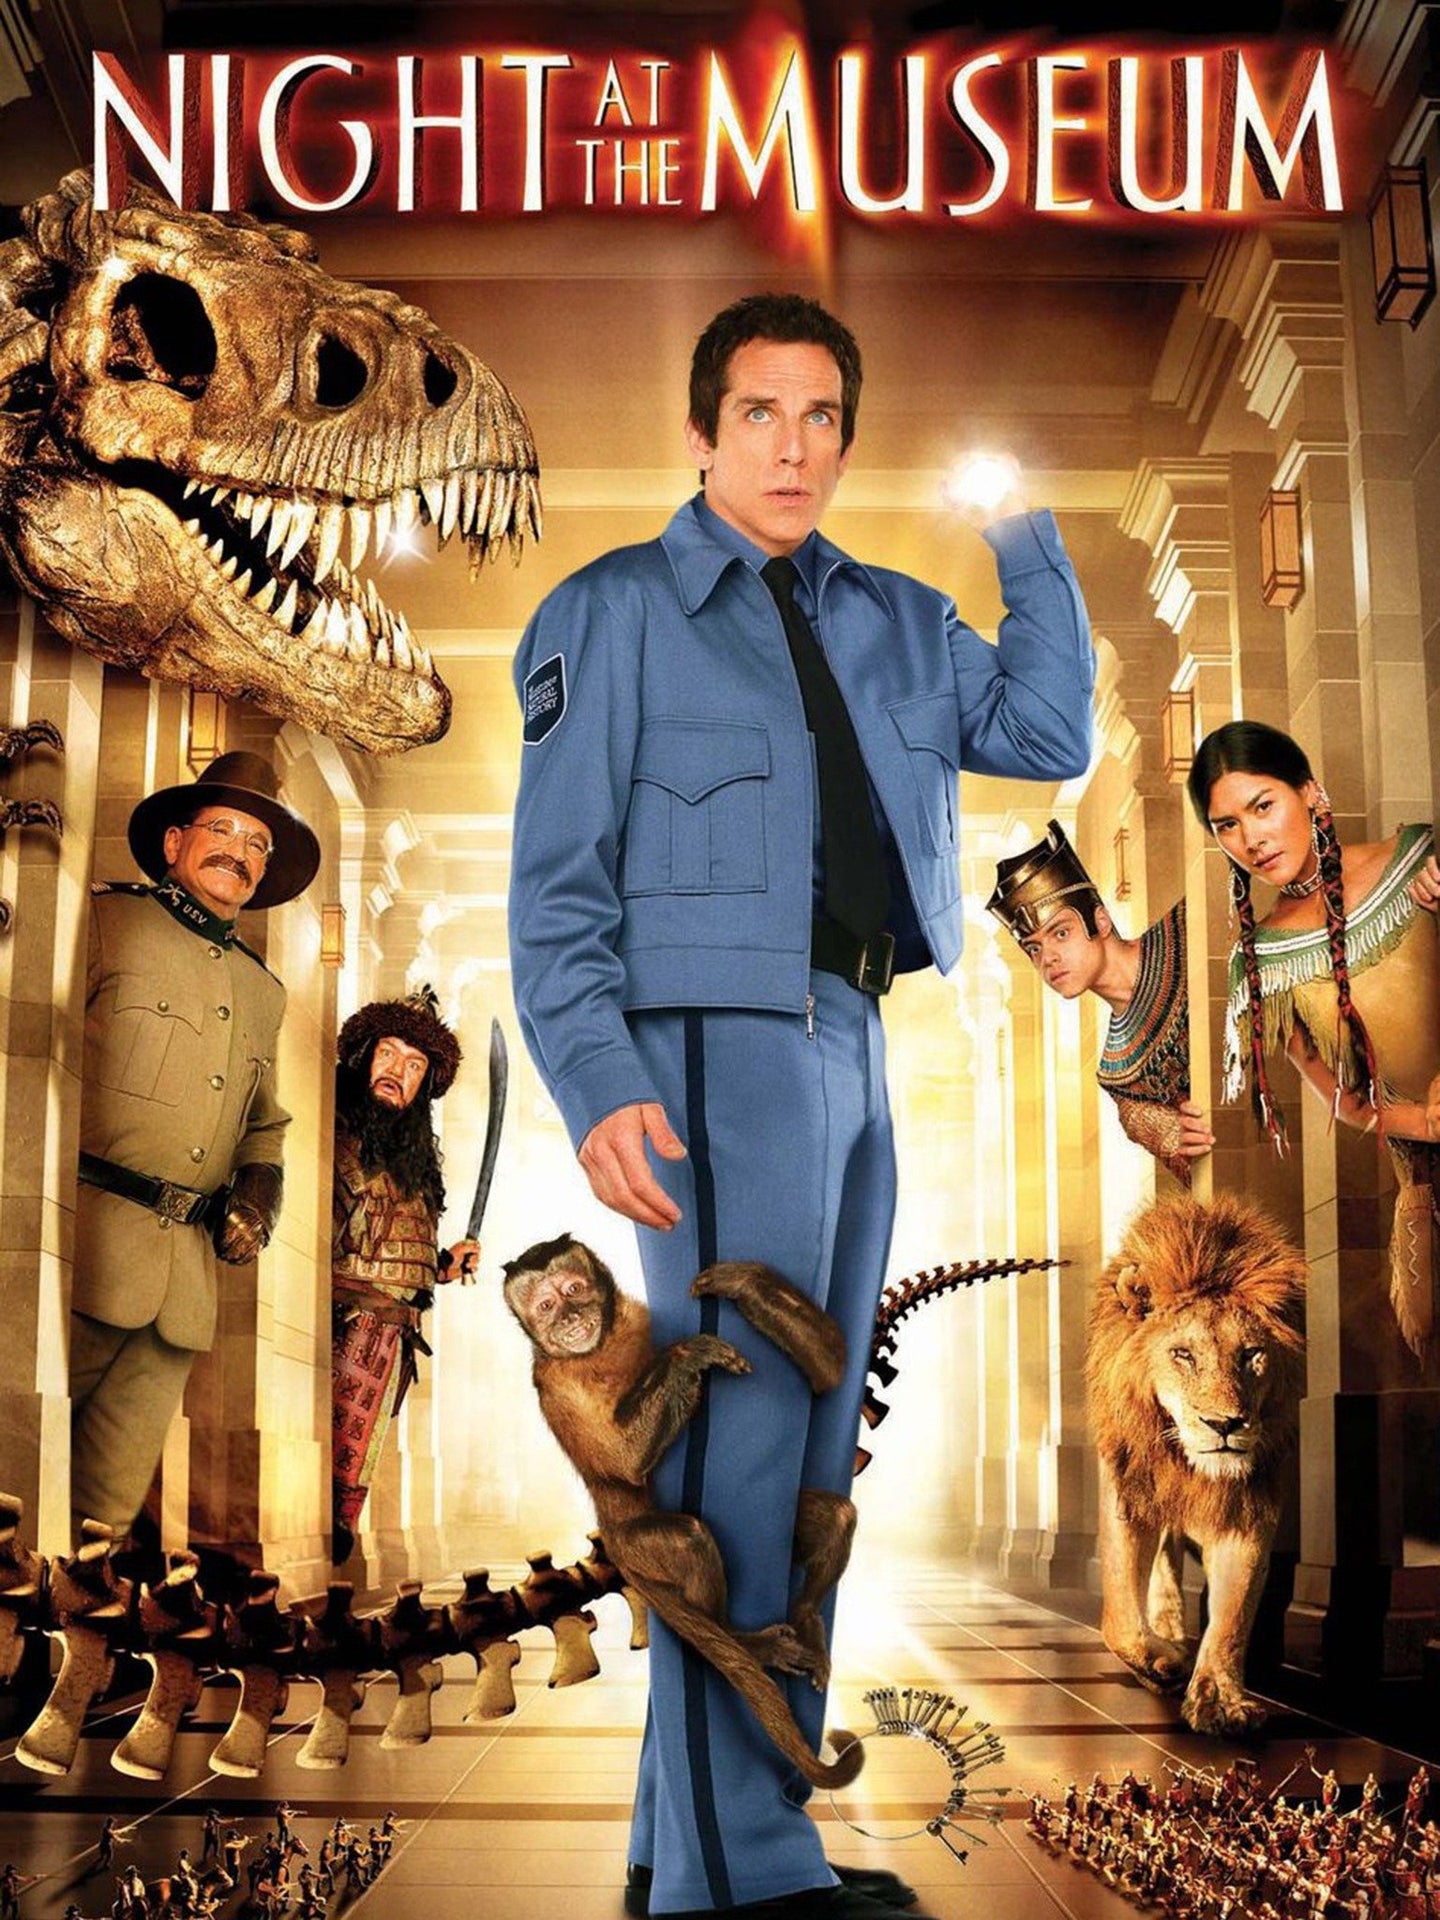 Night at the Museum (2006) Vudu or Movies Anywhere HD code